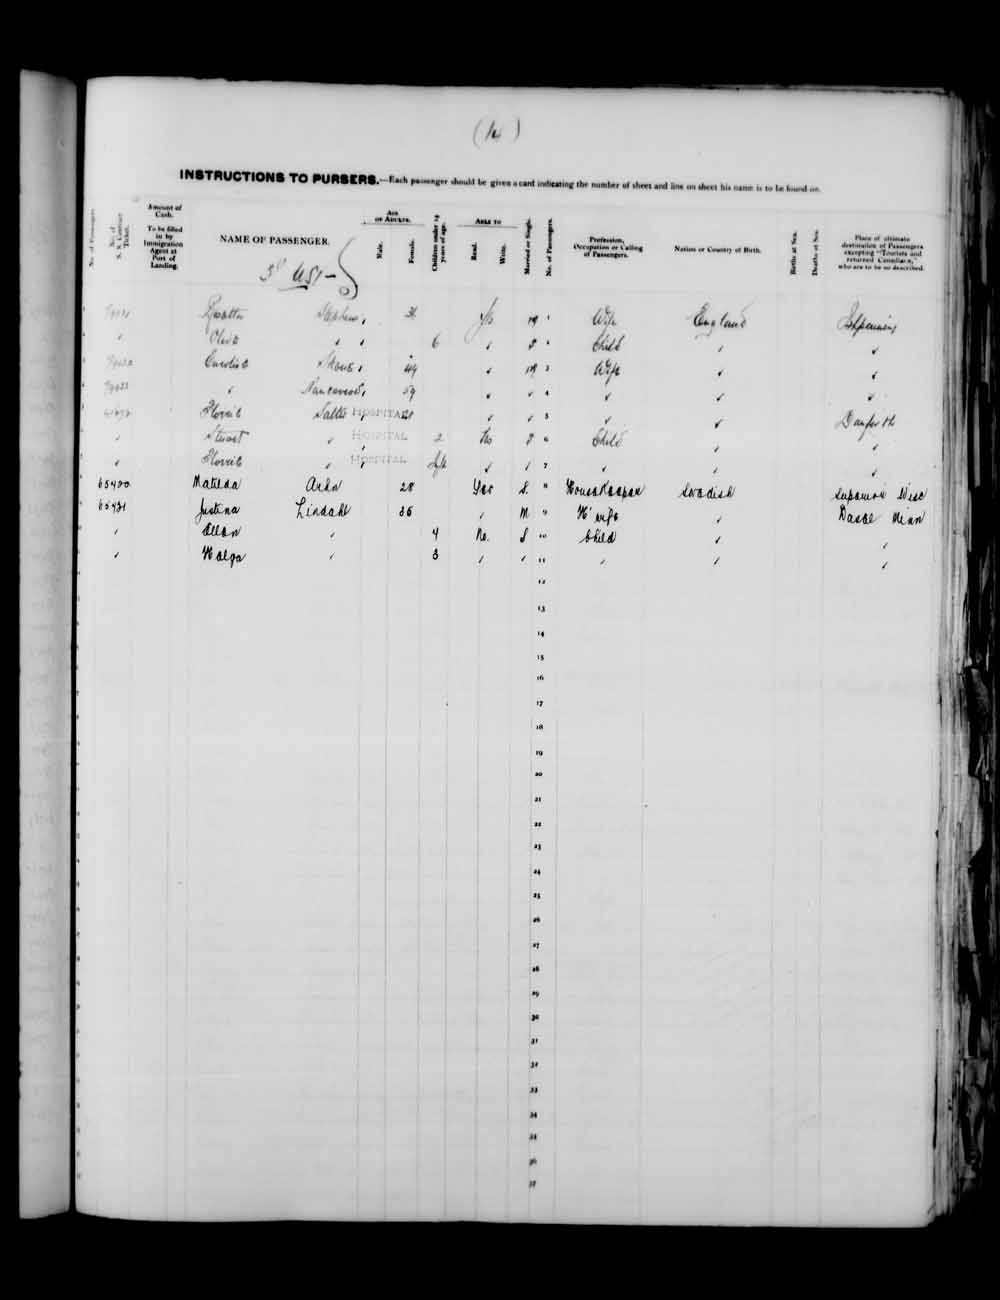 Digitized page of Quebec Passenger Lists for Image No.: e003591585